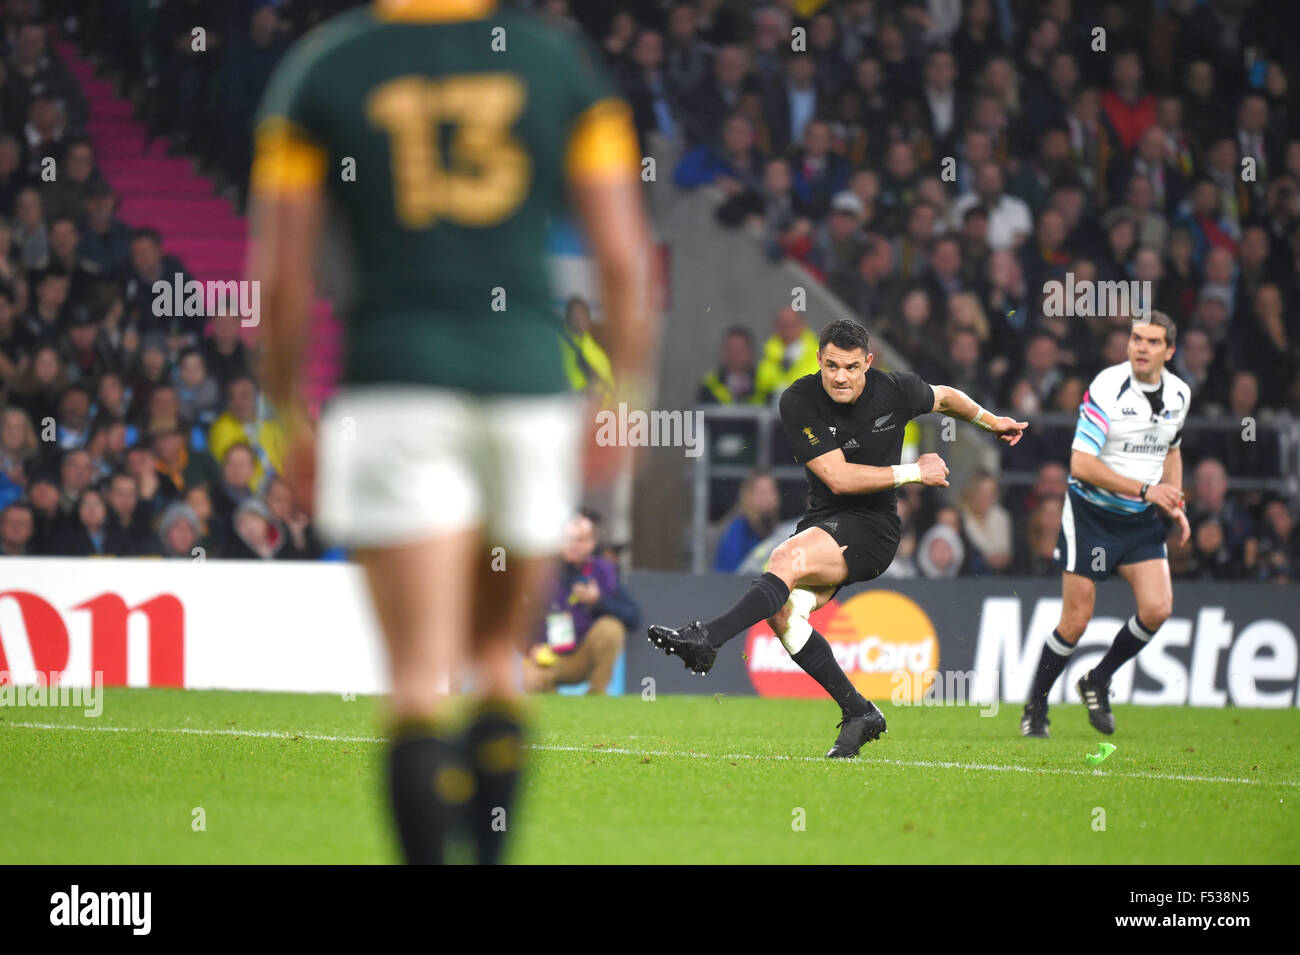 London, UK. 24th Oct, 2015. Dan Carter (NZL) Rugby : Dan Carter of New Zealand takes a penelty kick during the 2015 Rugby World Cup semi-final match between South Africa 18-20 New Zealand at Twickenham in London, England . © FAR EAST PRESS/AFLO/Alamy Live News Stock Photo